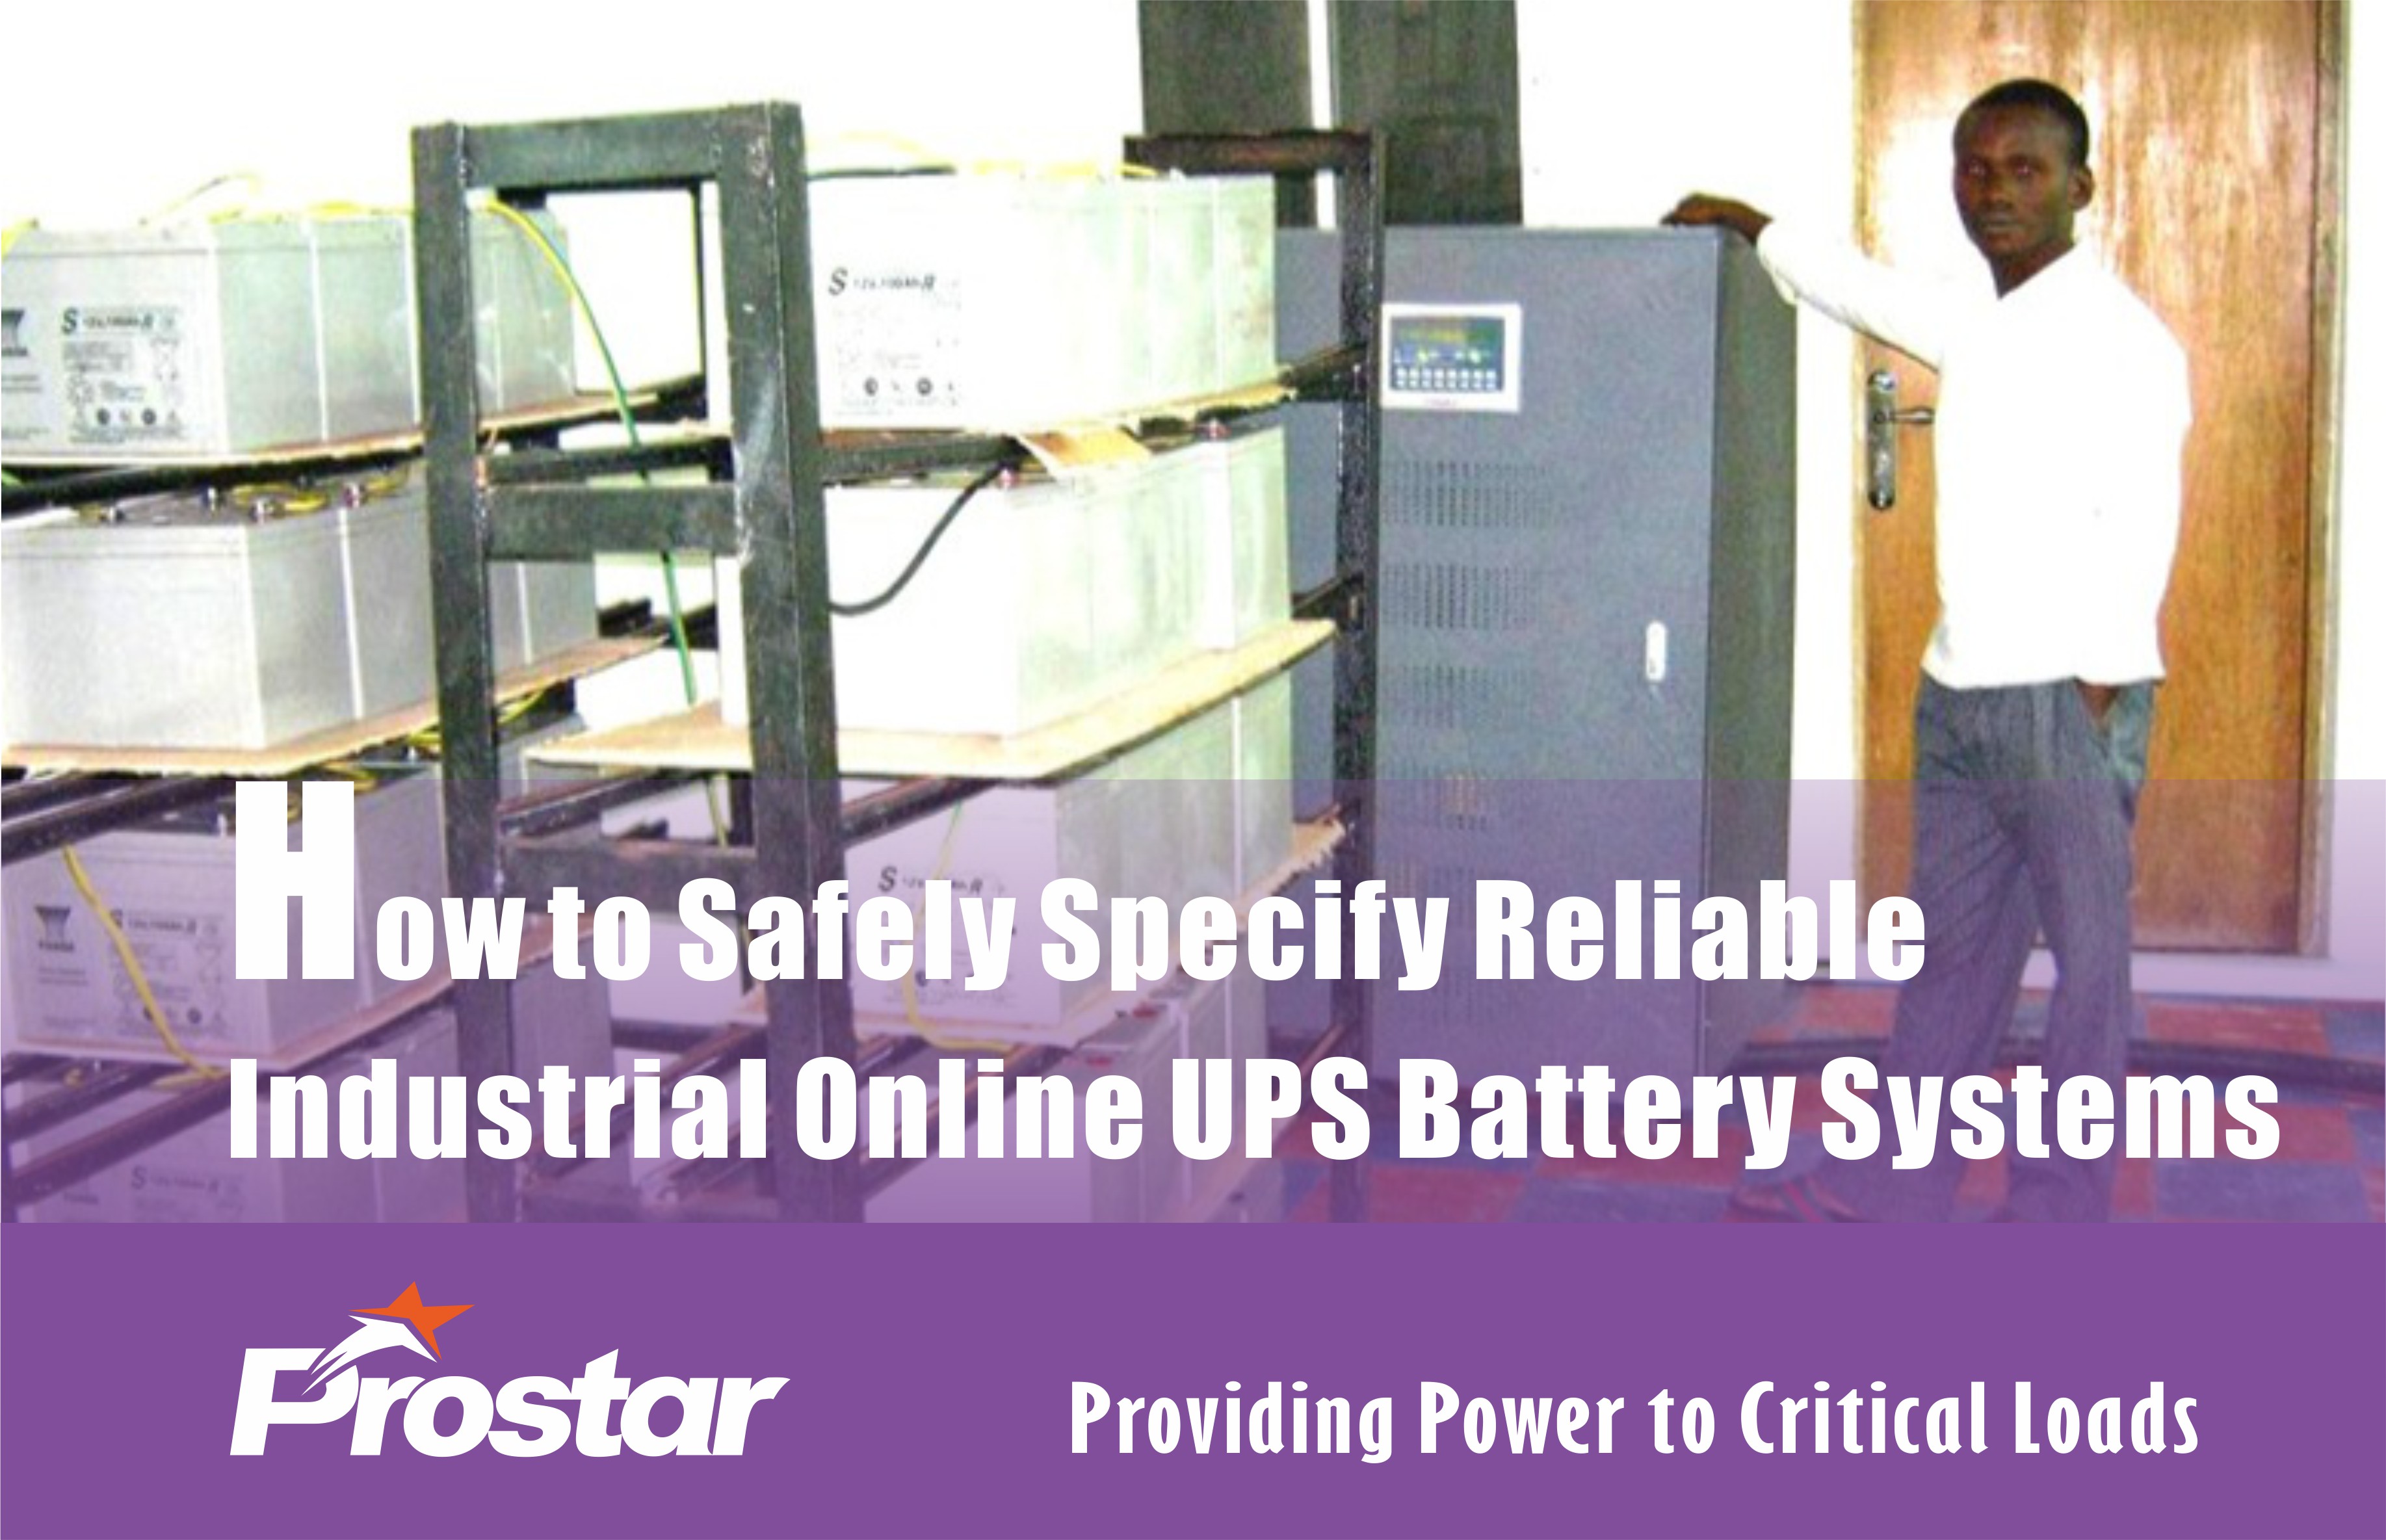 How to Safely Specify Reliable Industrial Online UPS Battery Systems